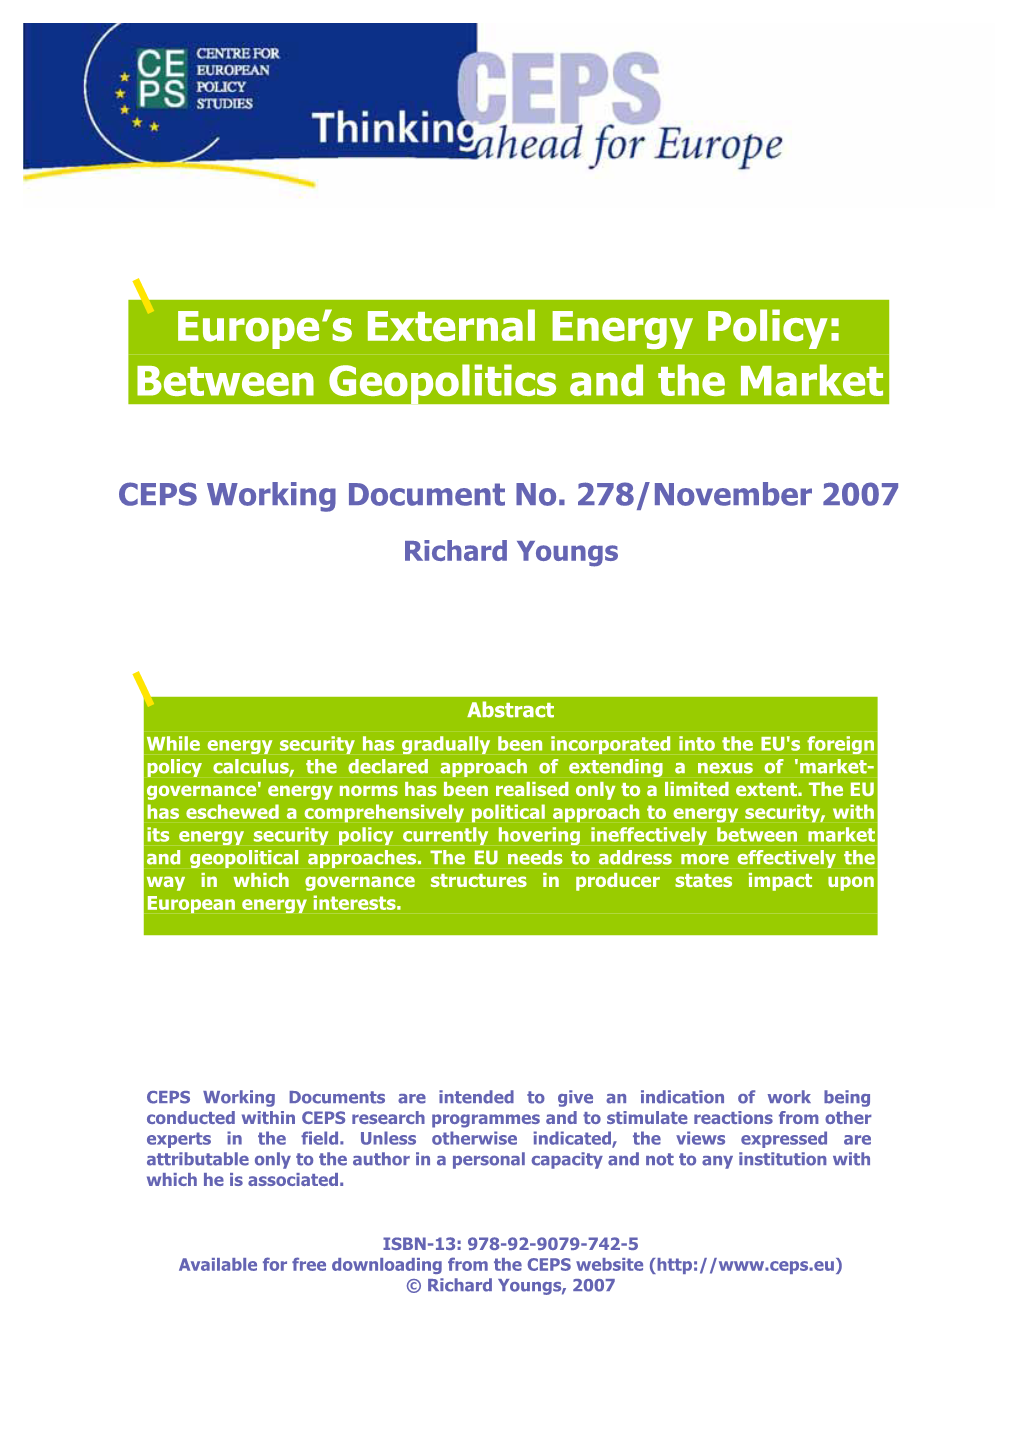 Europe's External Energy Policy: Between Geopolitics and the Market